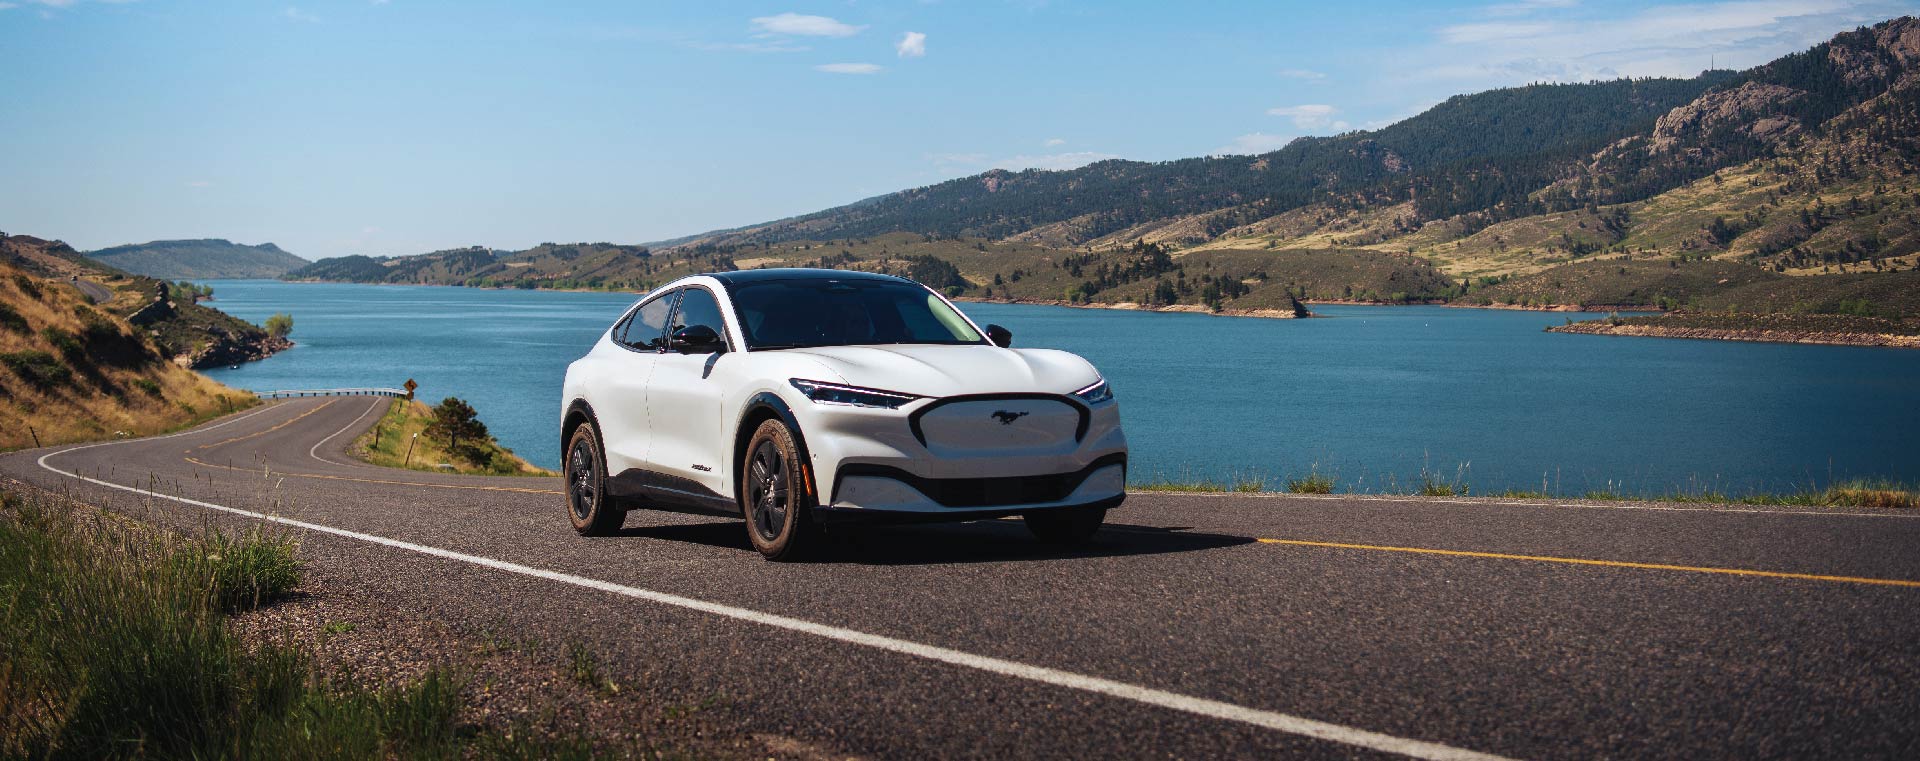 Celebrate National Drive Electric Week with new guide to electric vehicles